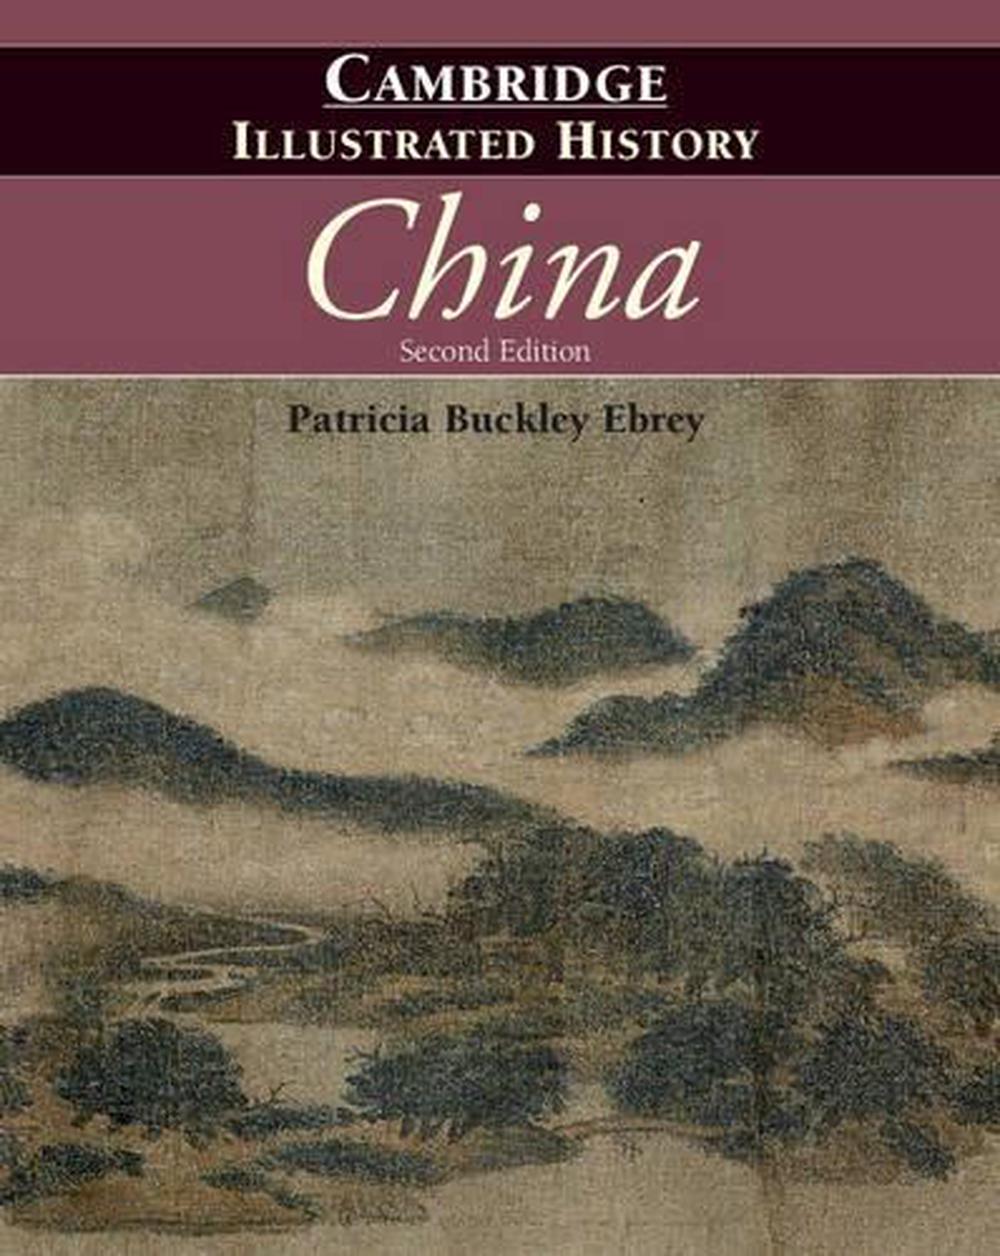 the cambridge illustrated history of china second edition download